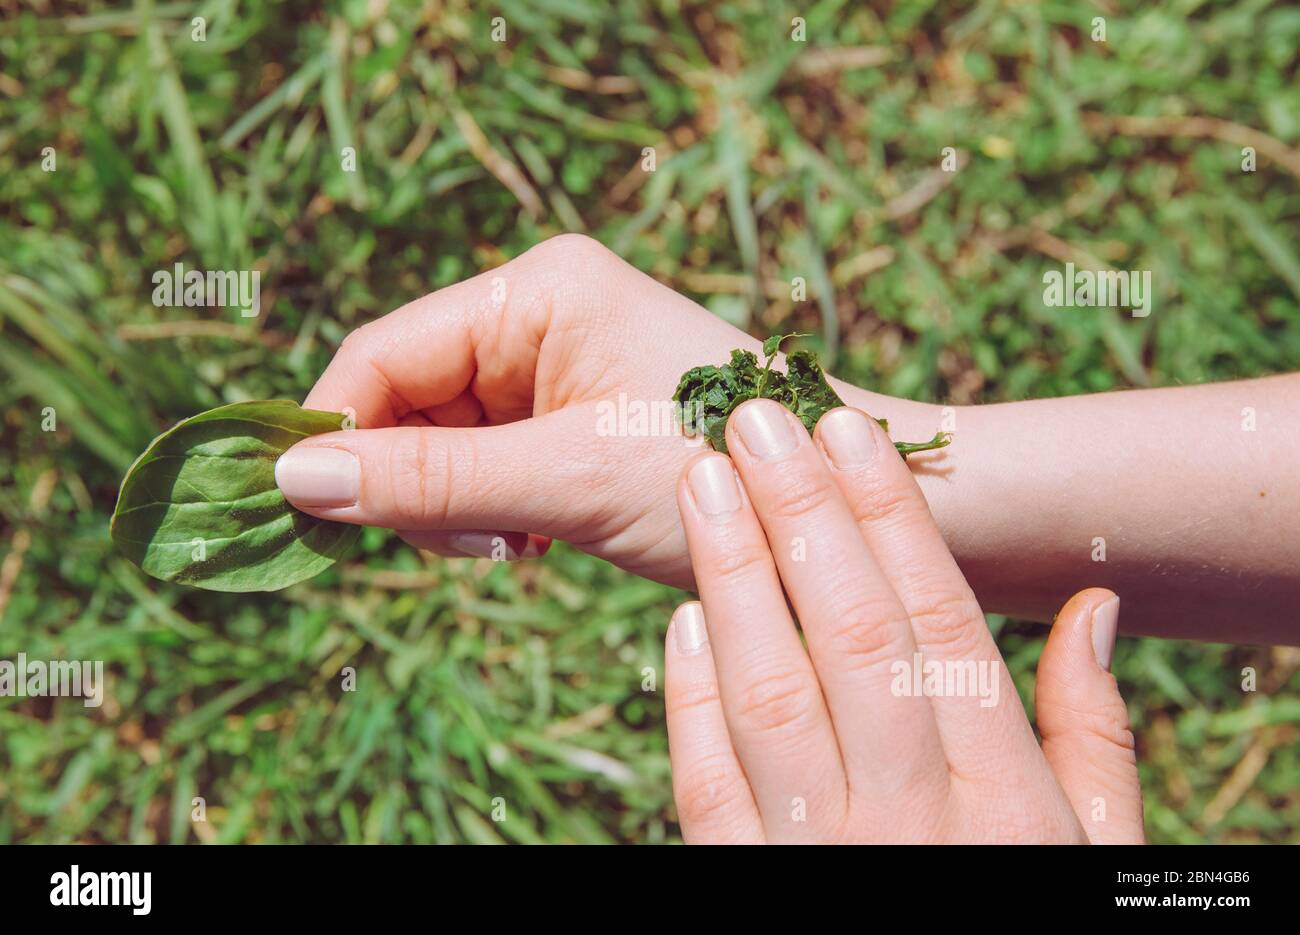 Person hand holding and healing wound with antibacterial plant mixture of Plantago major, broadleaf plantain, white man's foot, or greater plantain. Stock Photo